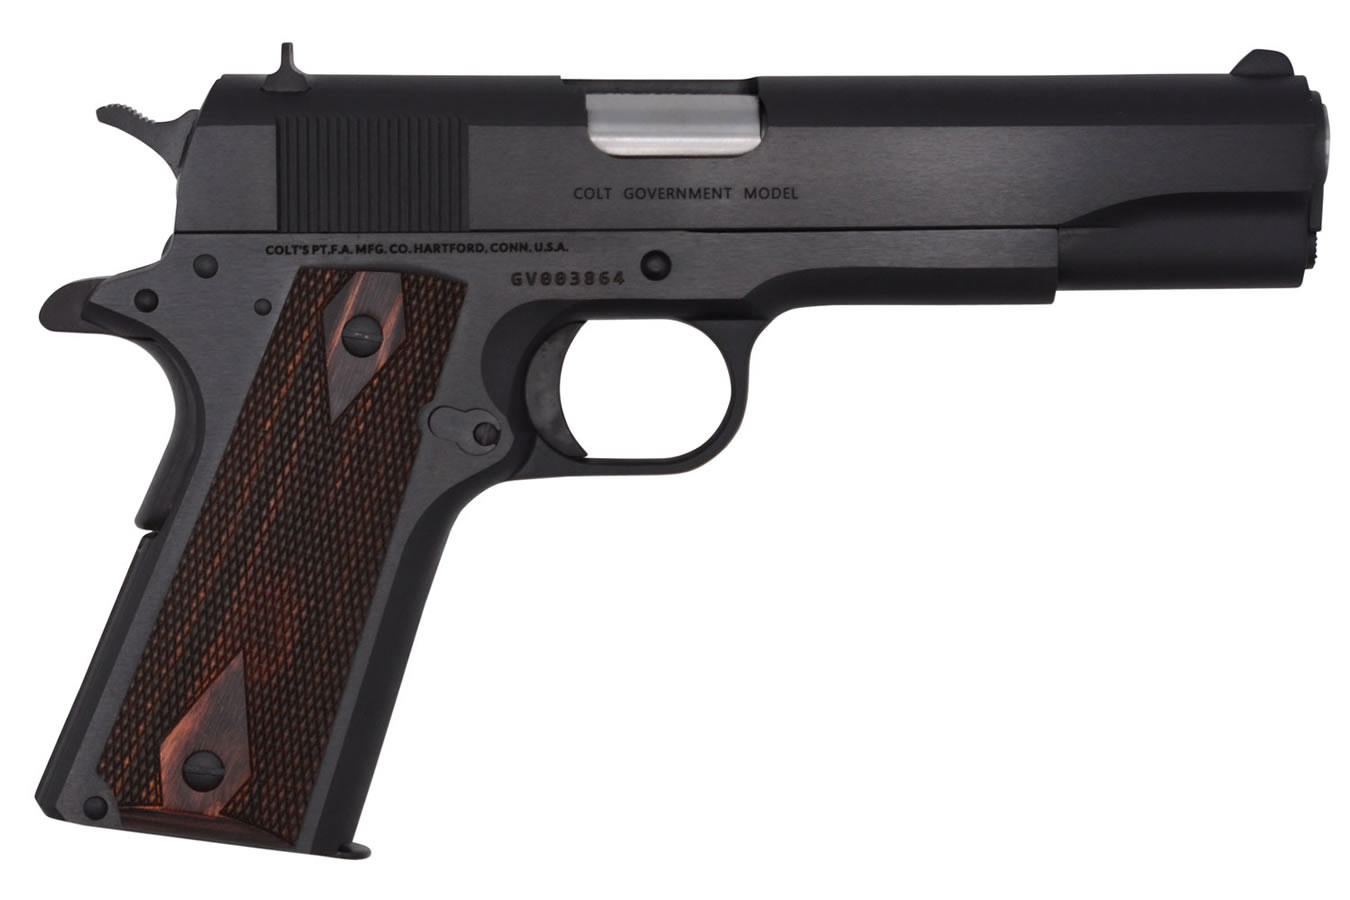 No. 1 Best Selling: COLT 1911 CLASSIC 45 ACP PISTOL WITH ROSEWOOD GRIPS